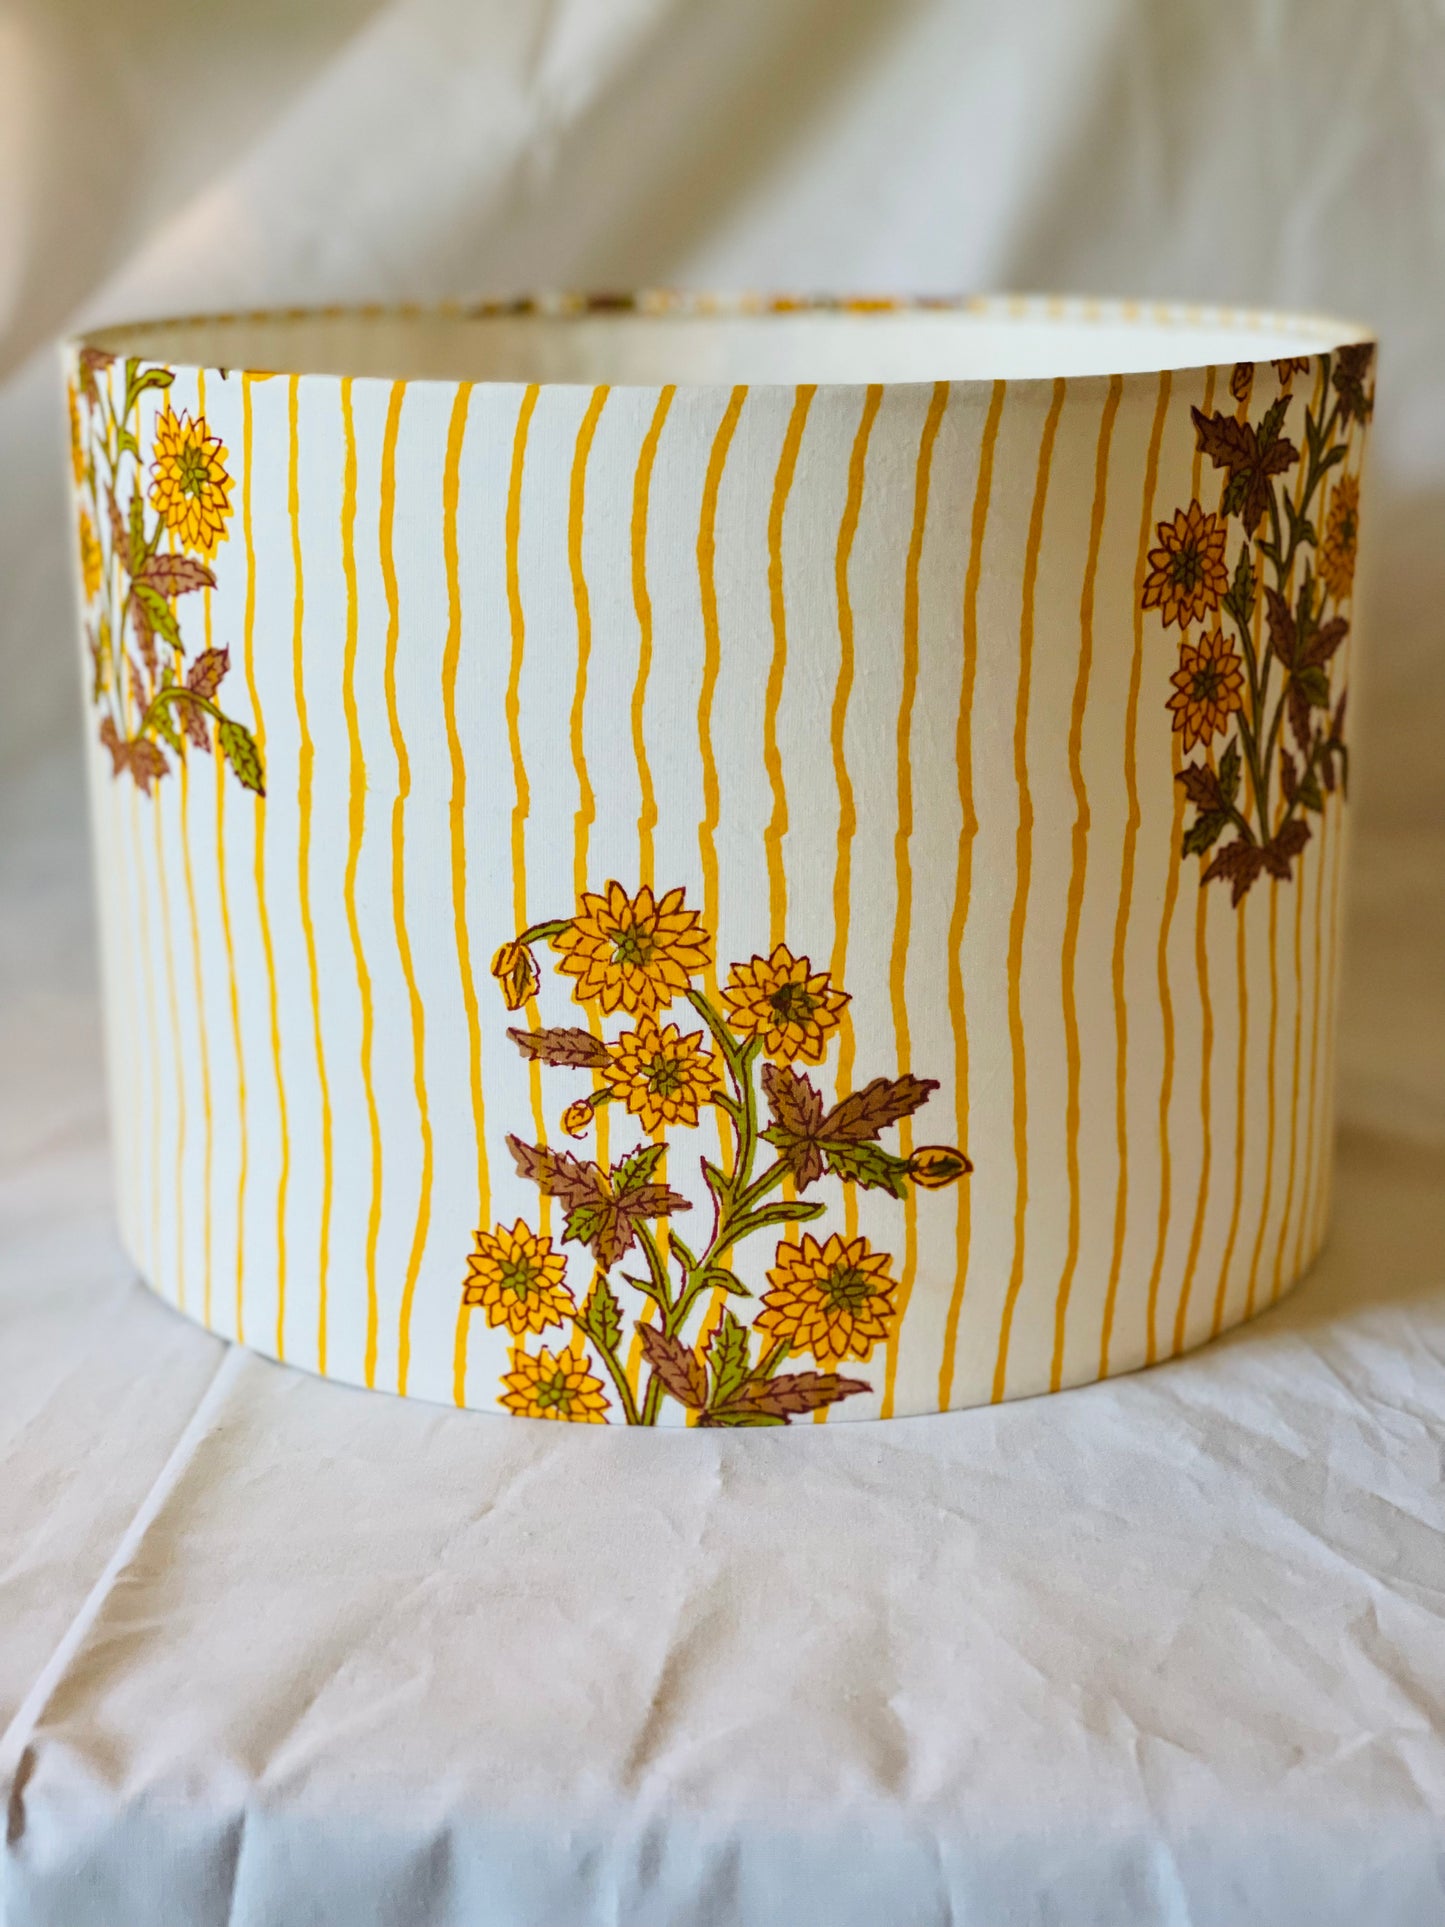 10 inch Drum Lampshade. Indian Block print from Jaipur. Harvest Gold, Ginger, and Olive Floral Stripe.